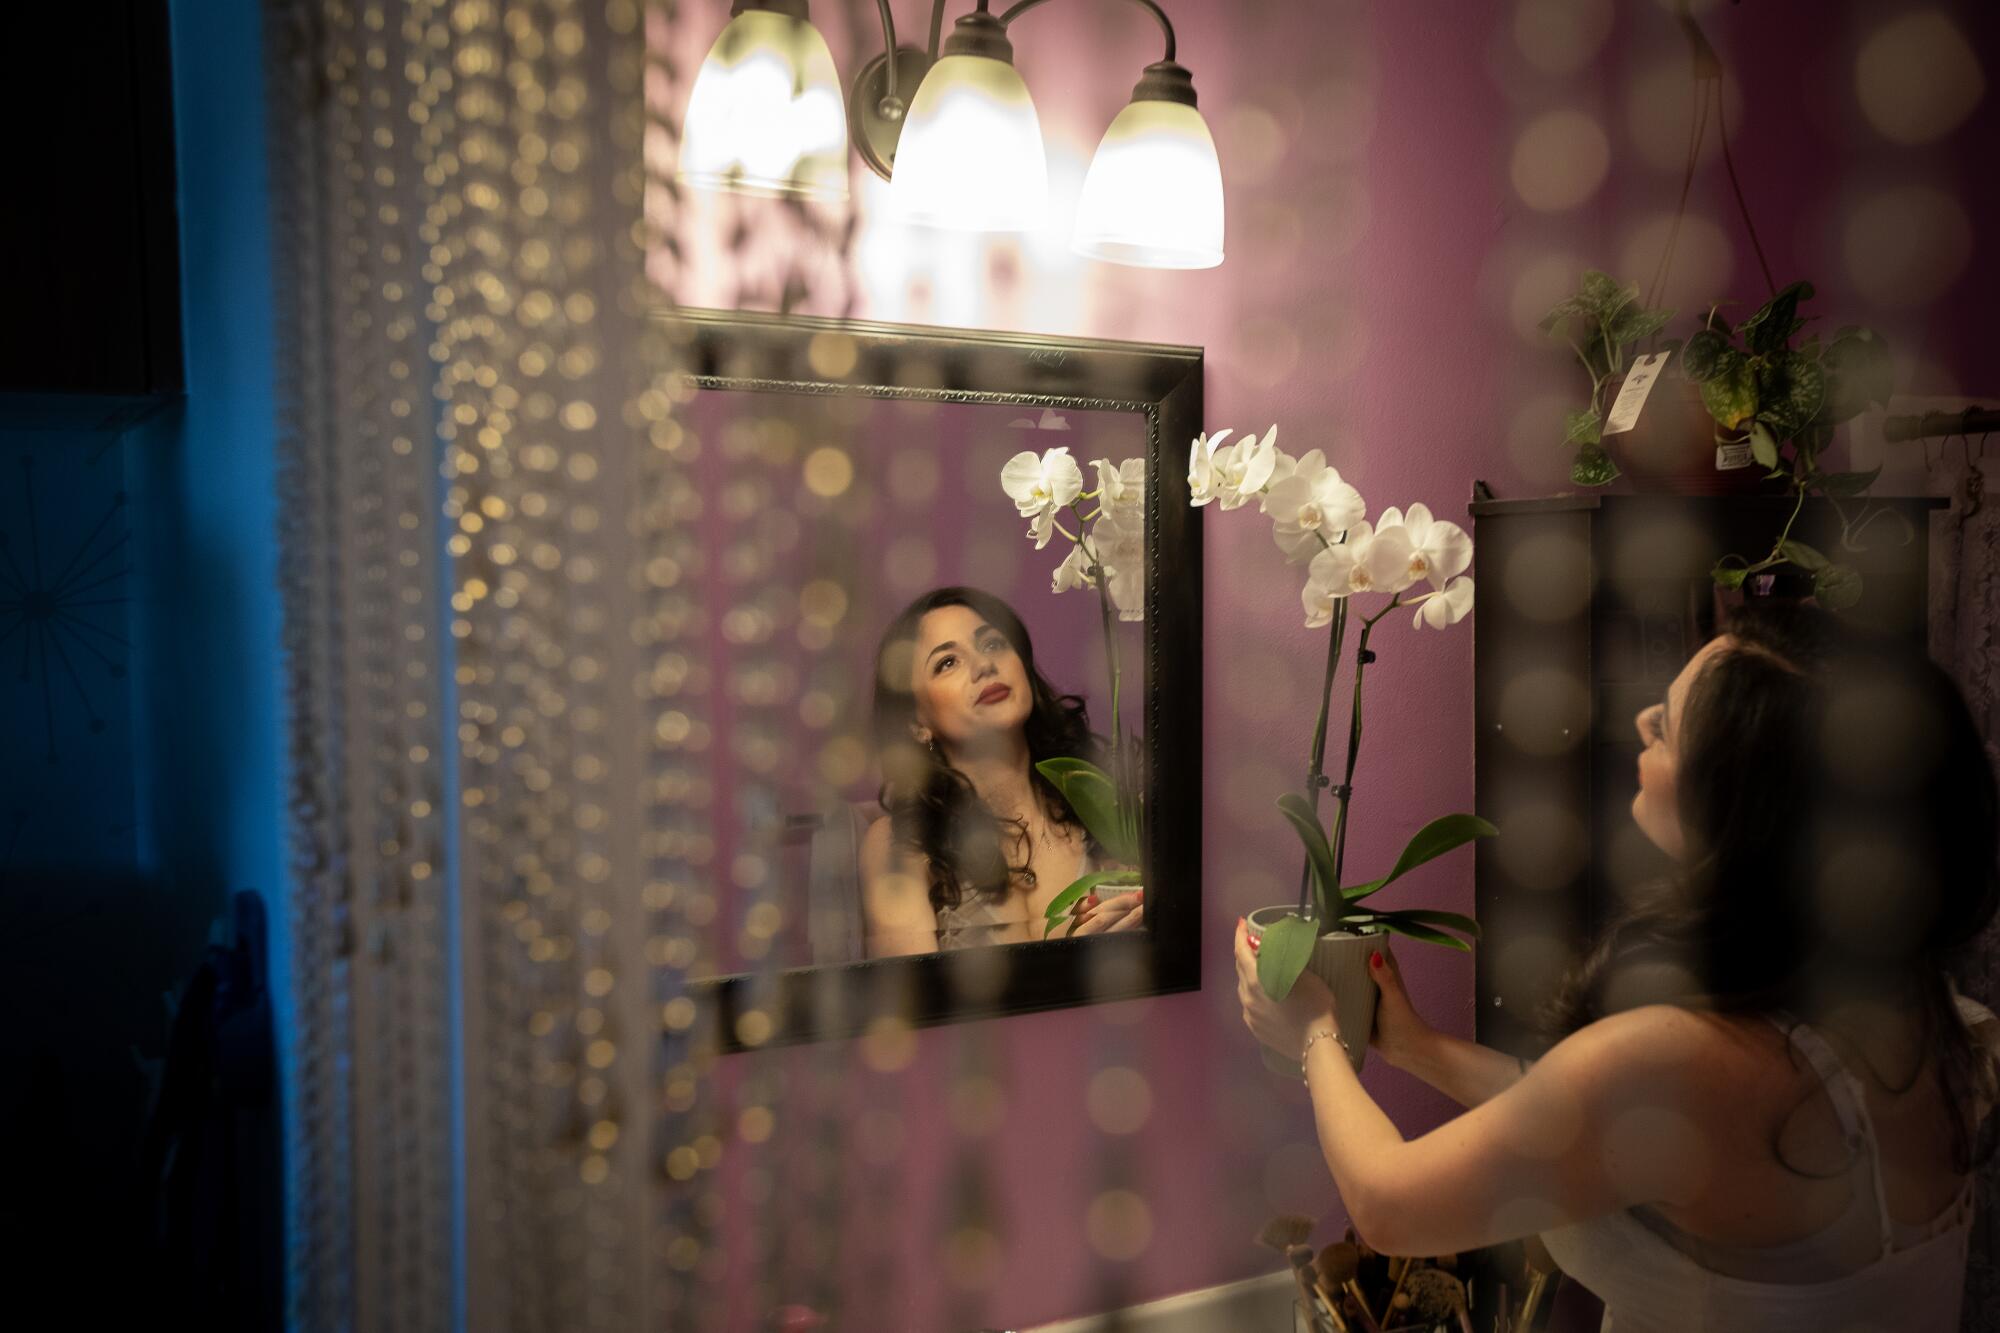 Gogo Akopyan holds potted flowers in front of her bathroom mirror